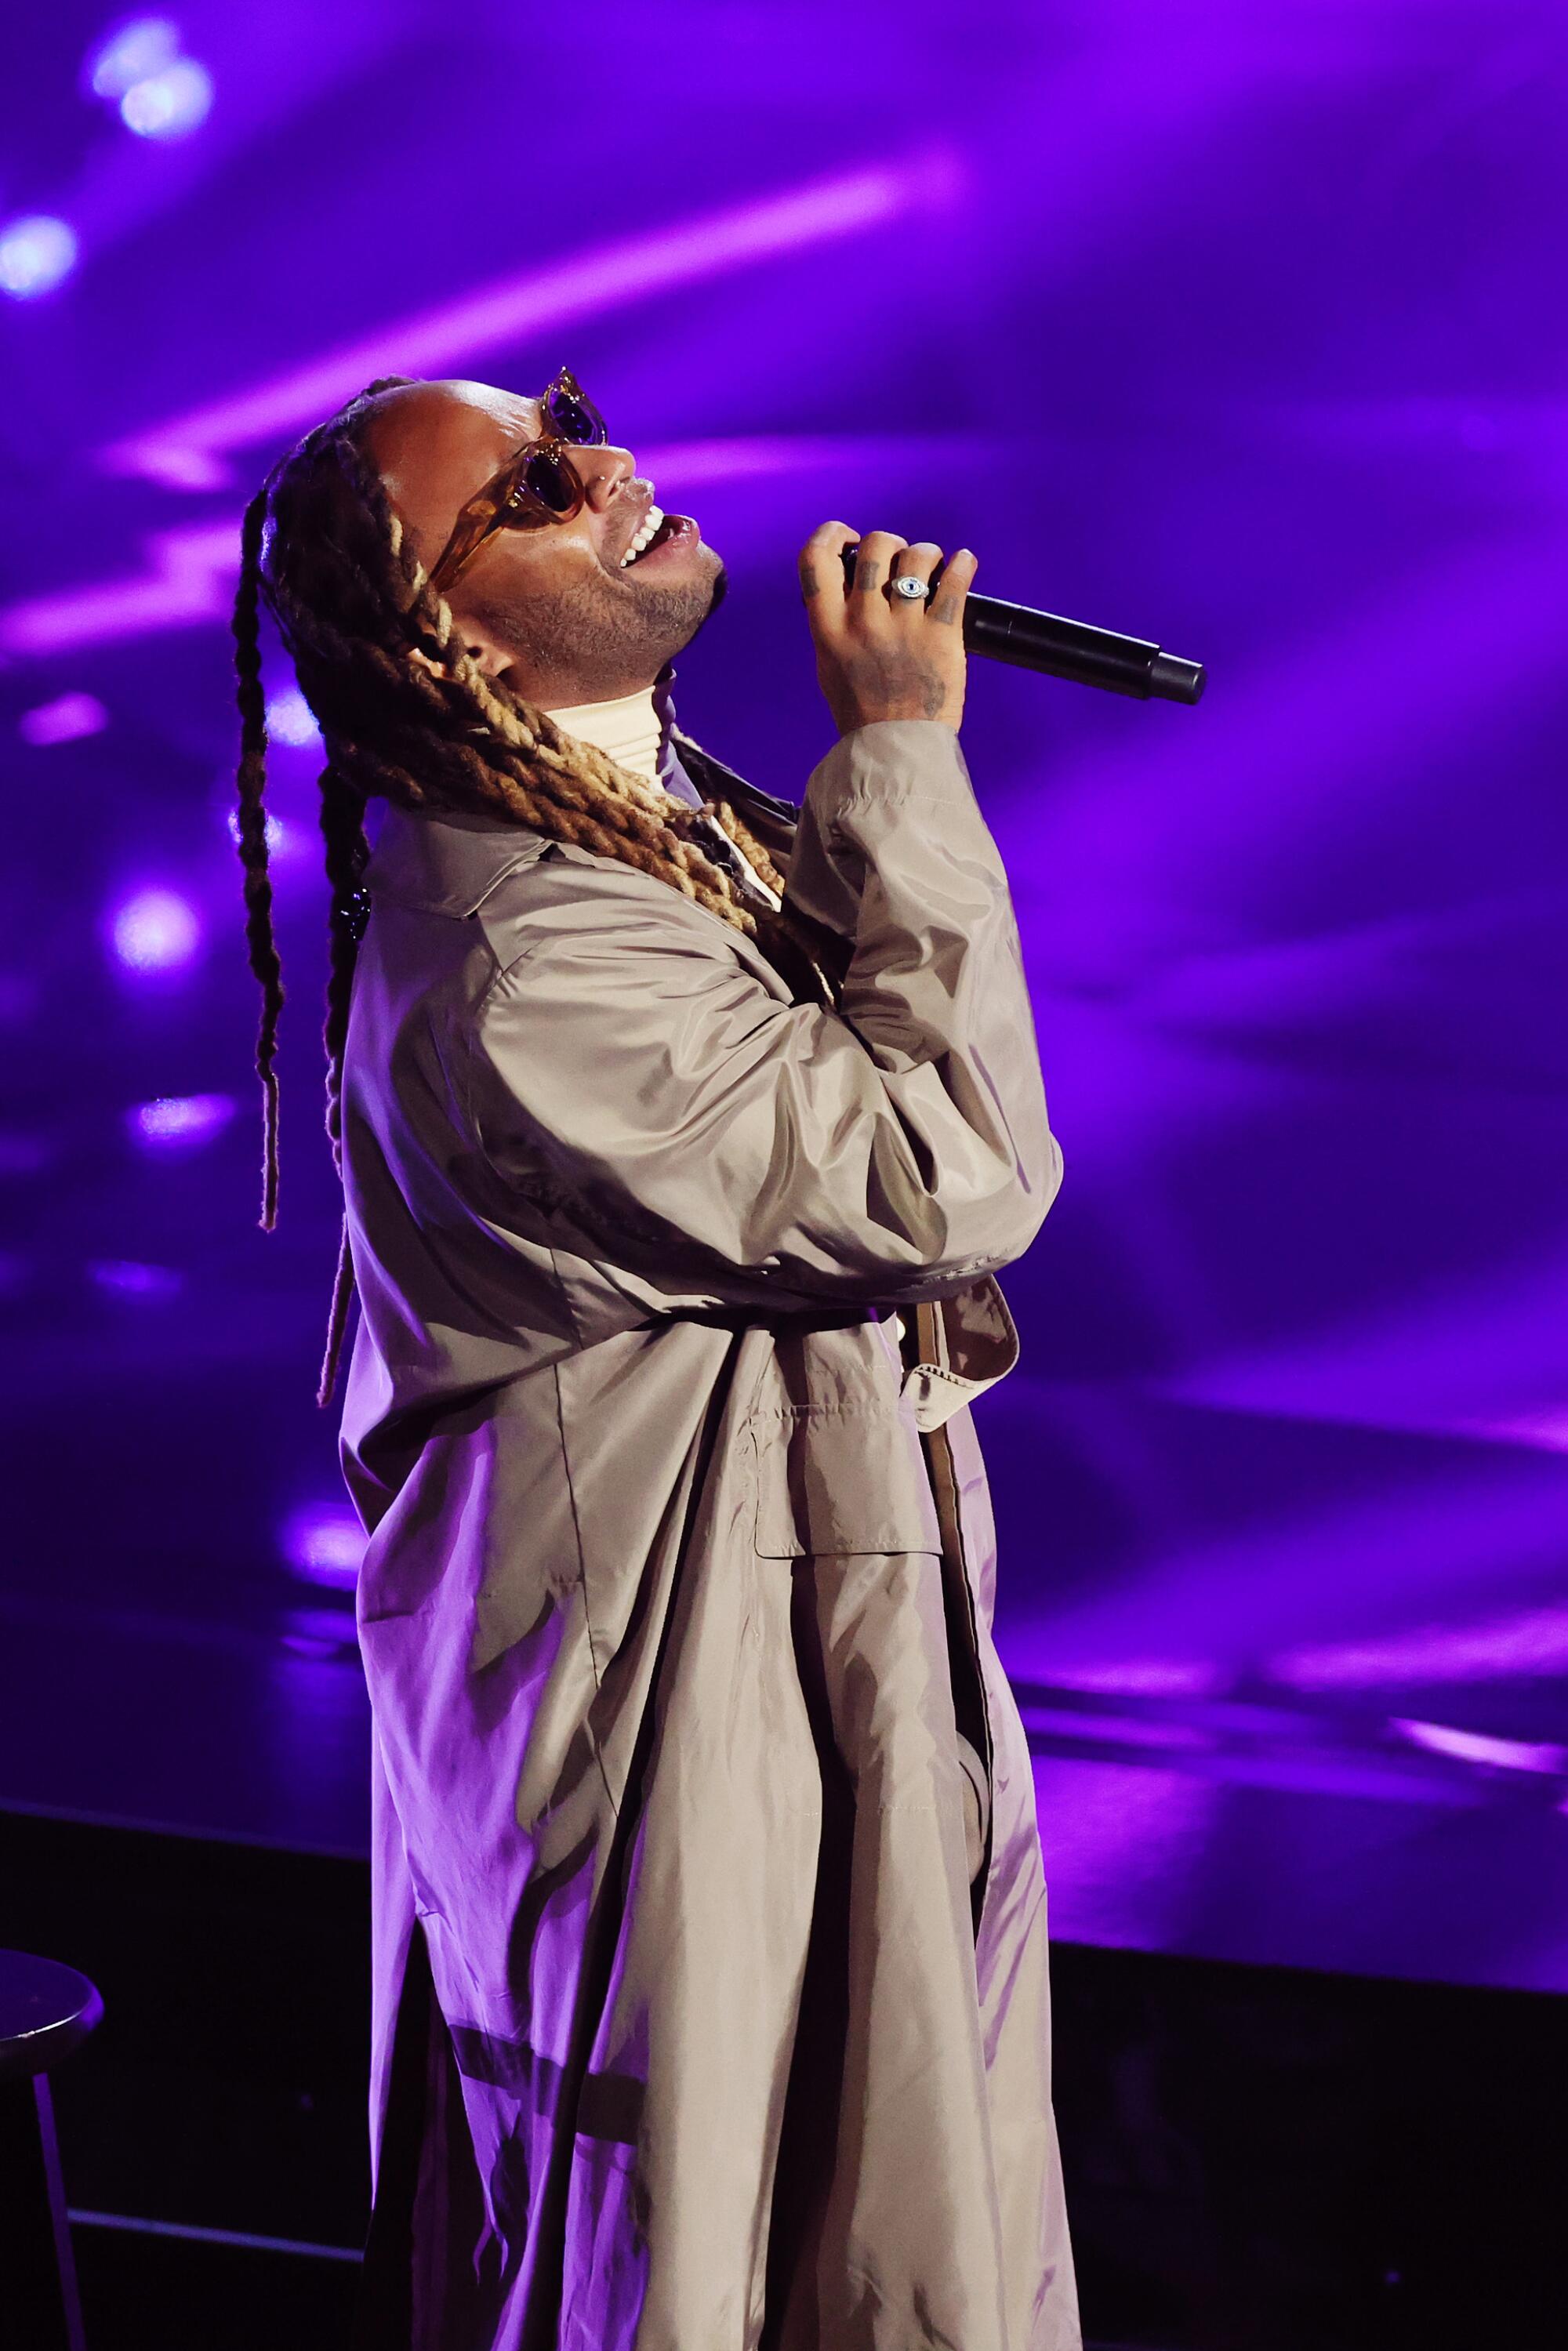 Ty Dolla Sign, in sunglasses and a long tan duster, sings into the microphone.